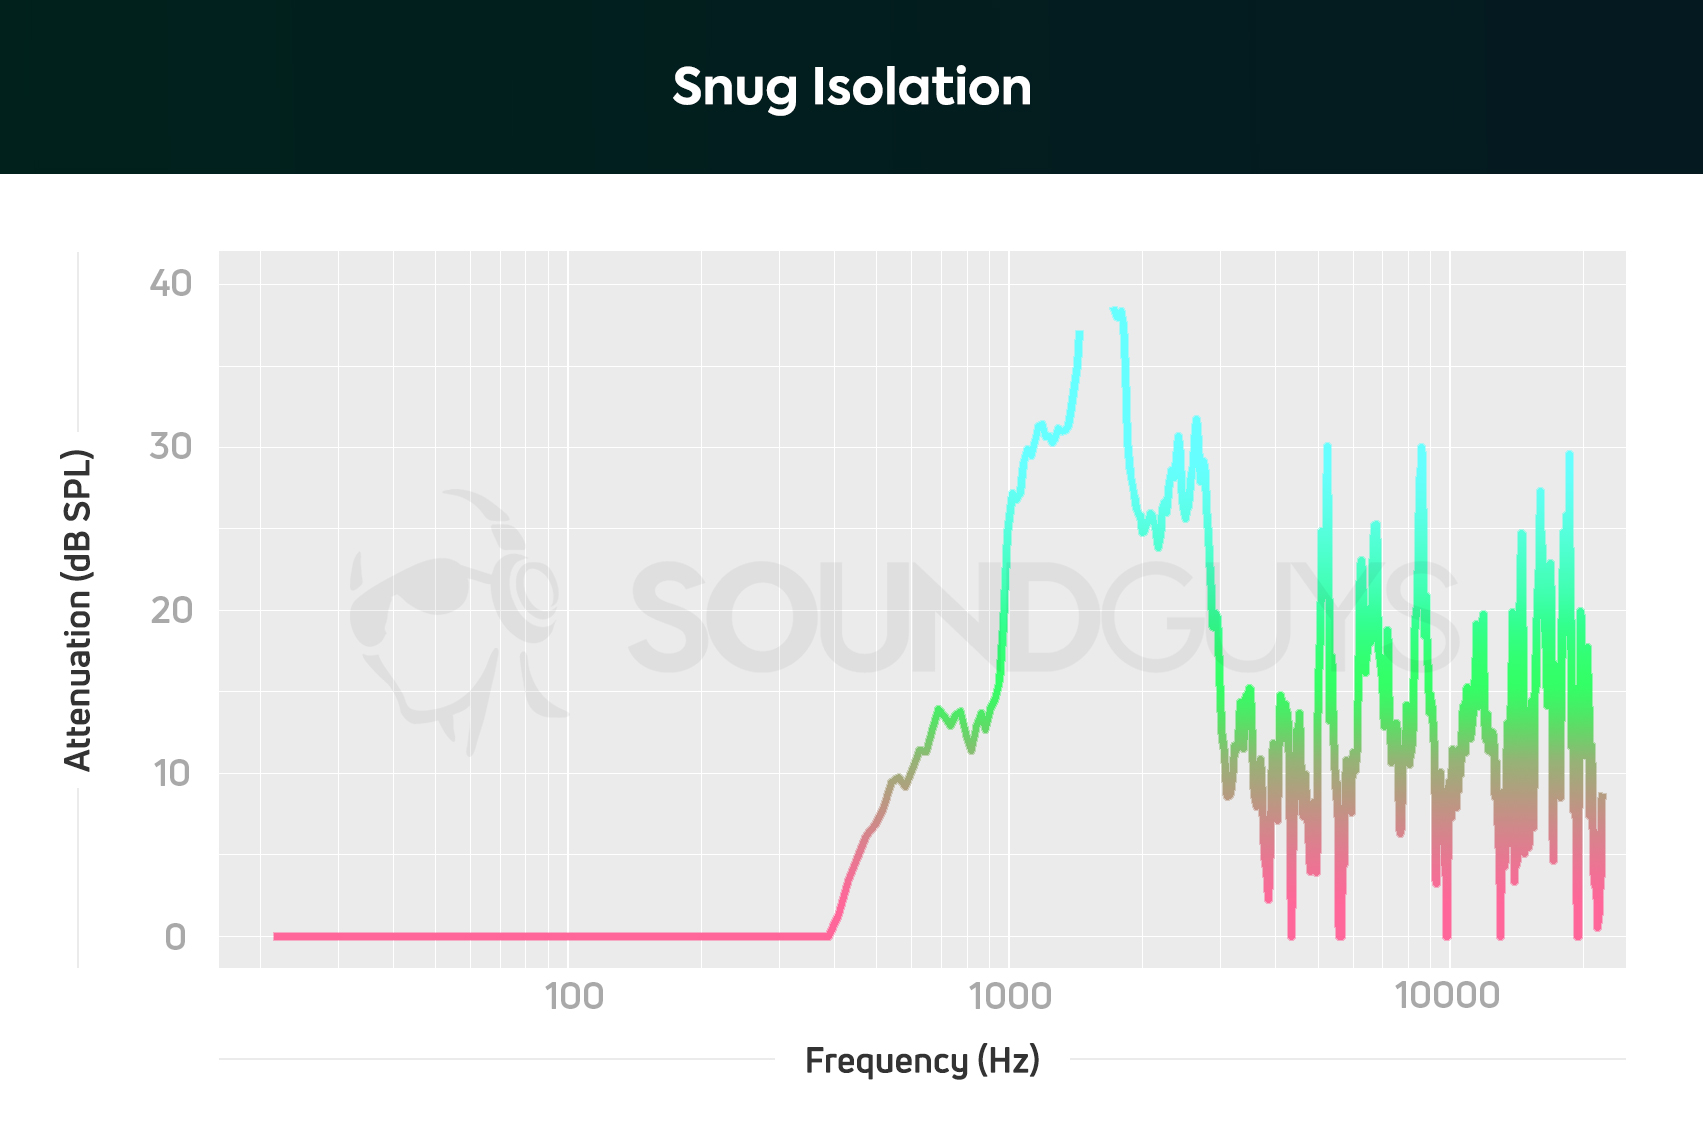 An isolation chart of the Snug children's hearing protectors.